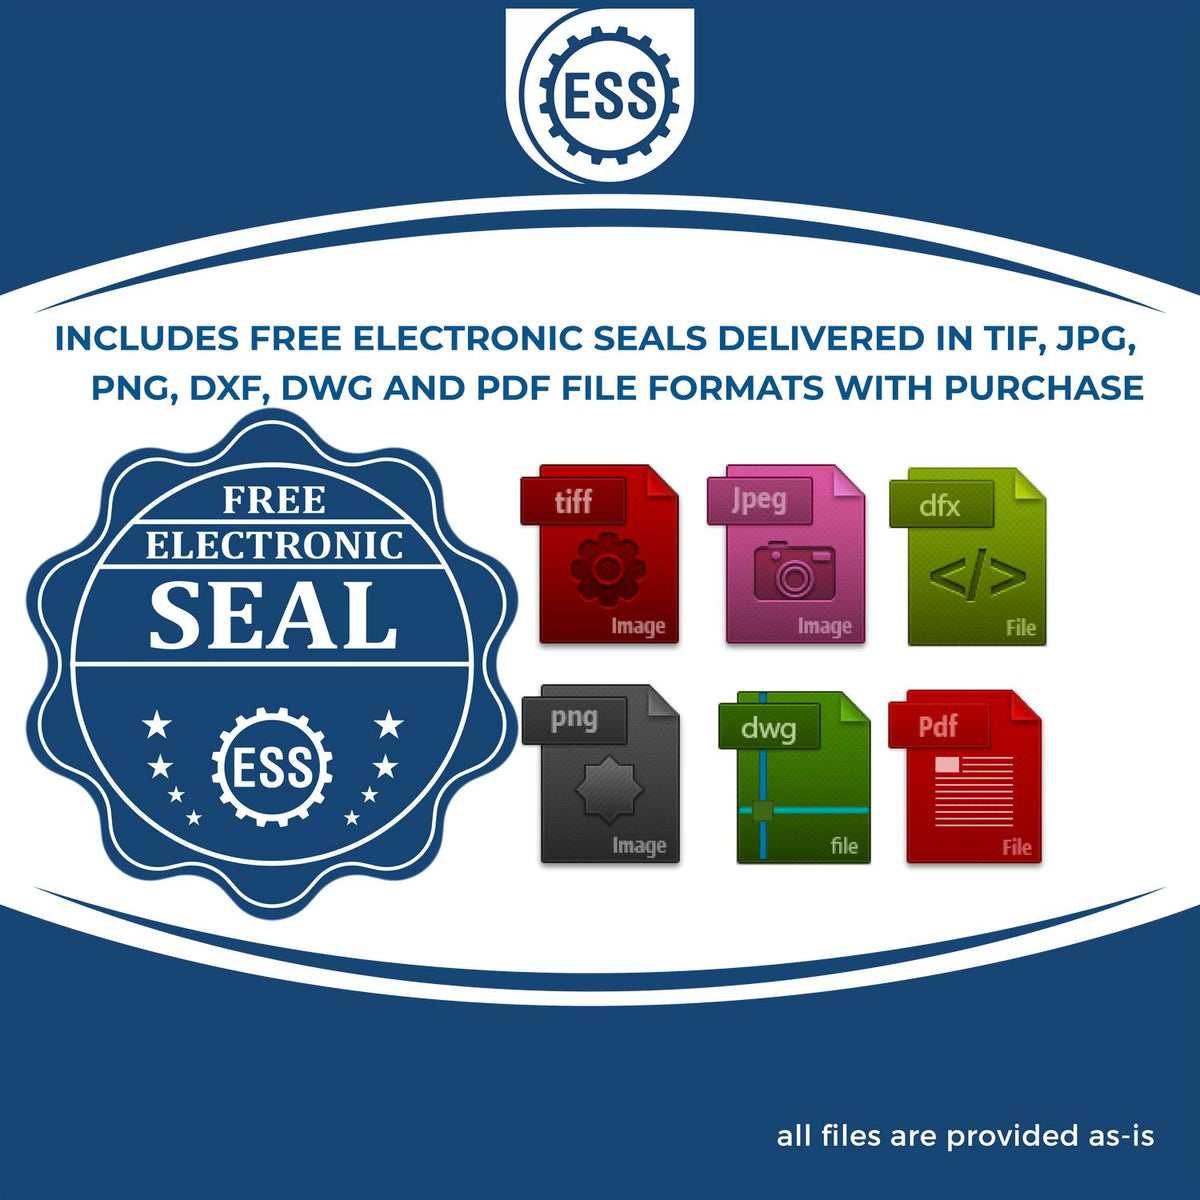 An infographic for the free electronic seal for the Slim Pre-Inked Michigan Landscape Architect Seal Stamp illustrating the different file type icons such as DXF, DWG, TIF, JPG and PNG.